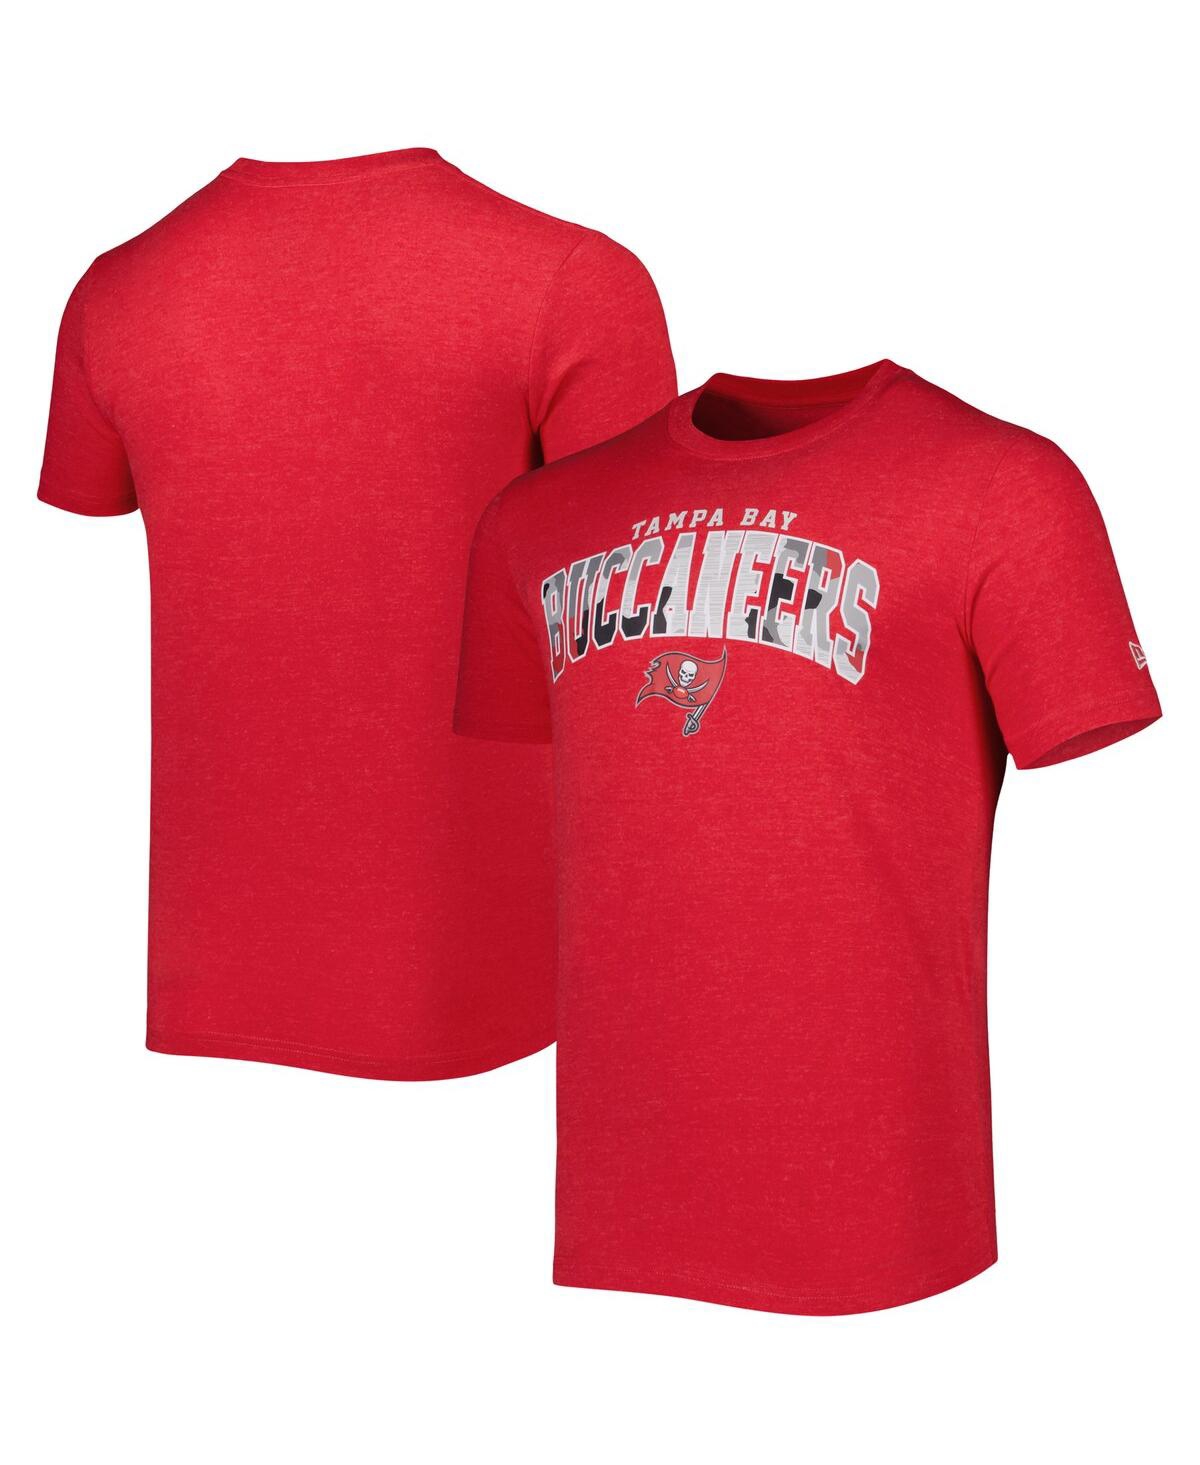 New Era Men's  Heathered Red Tampa Bay Buccaneers Training Collection T-shirt